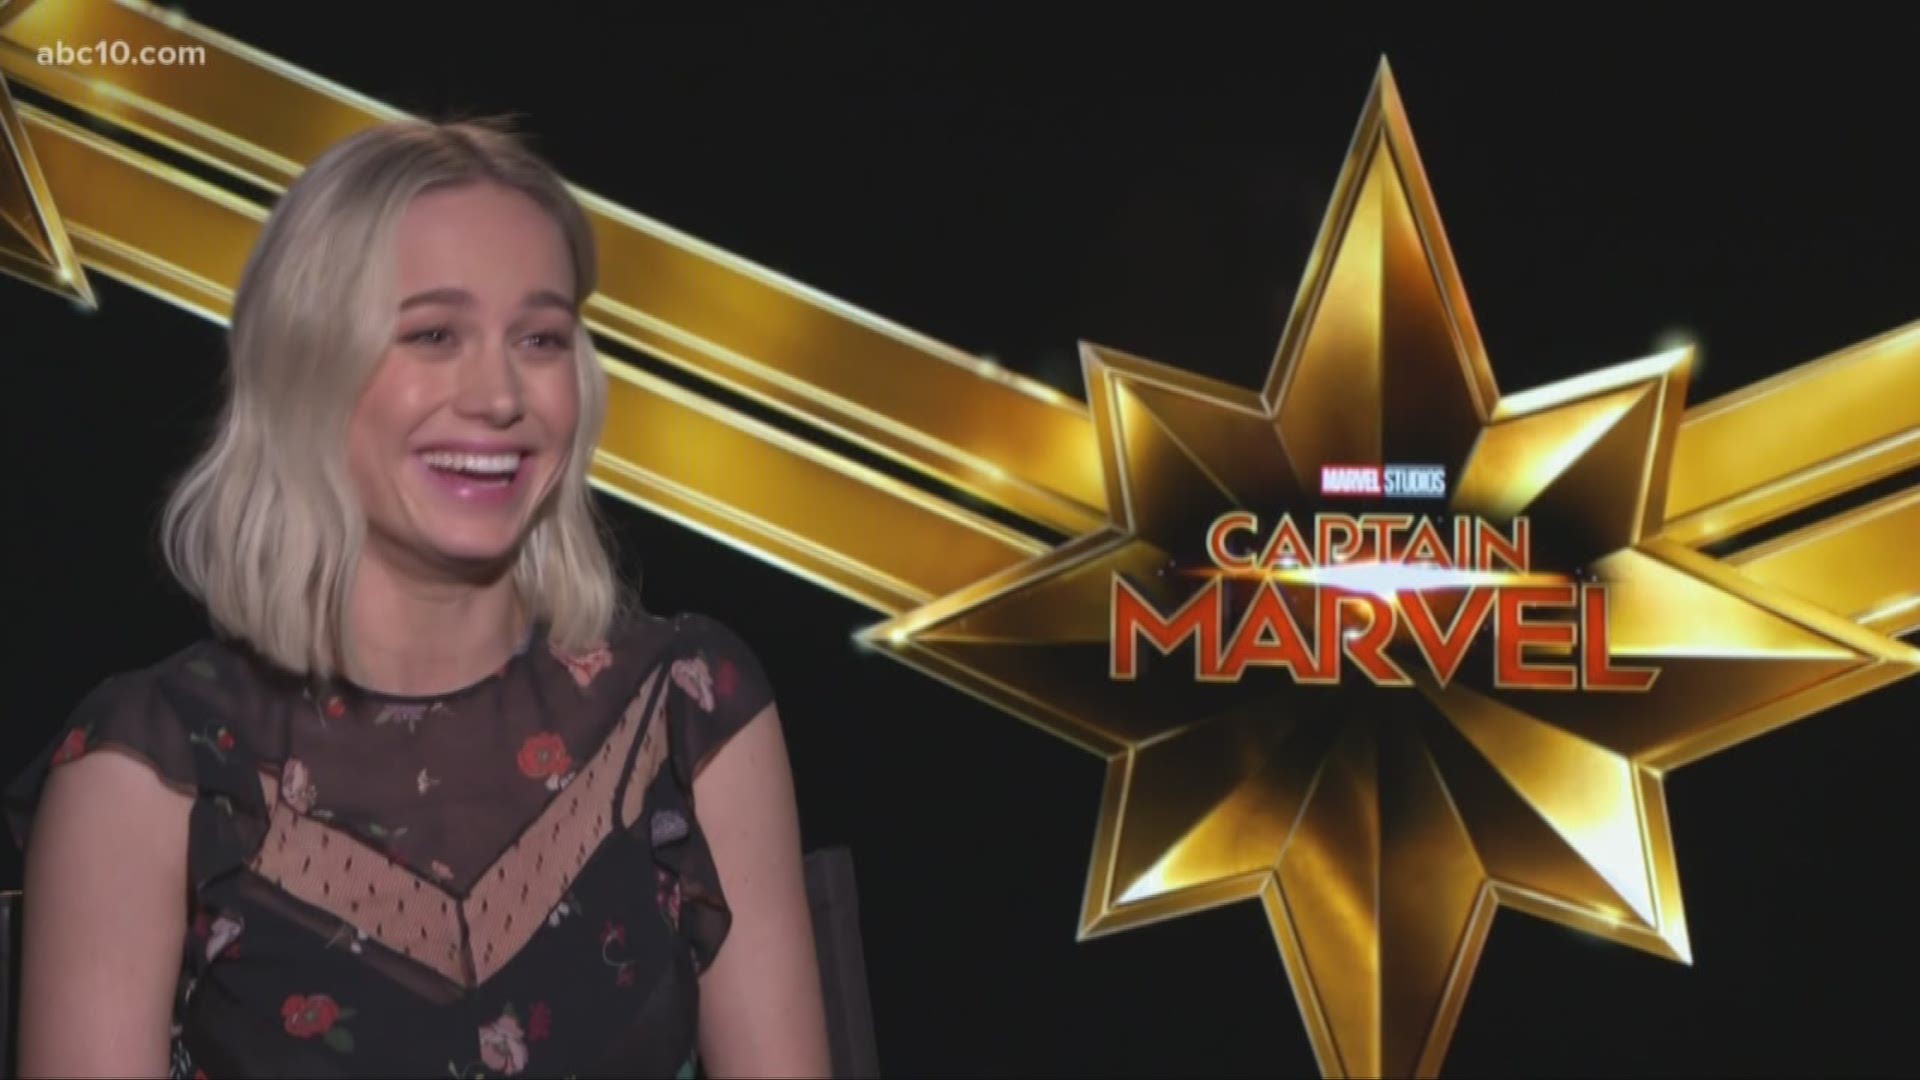 Extra Butter corespondent Kelly Savanna Deaton sat down with "Captain Marvel" herself, Brie Larson to talk about the movie and her Sacramento ties.